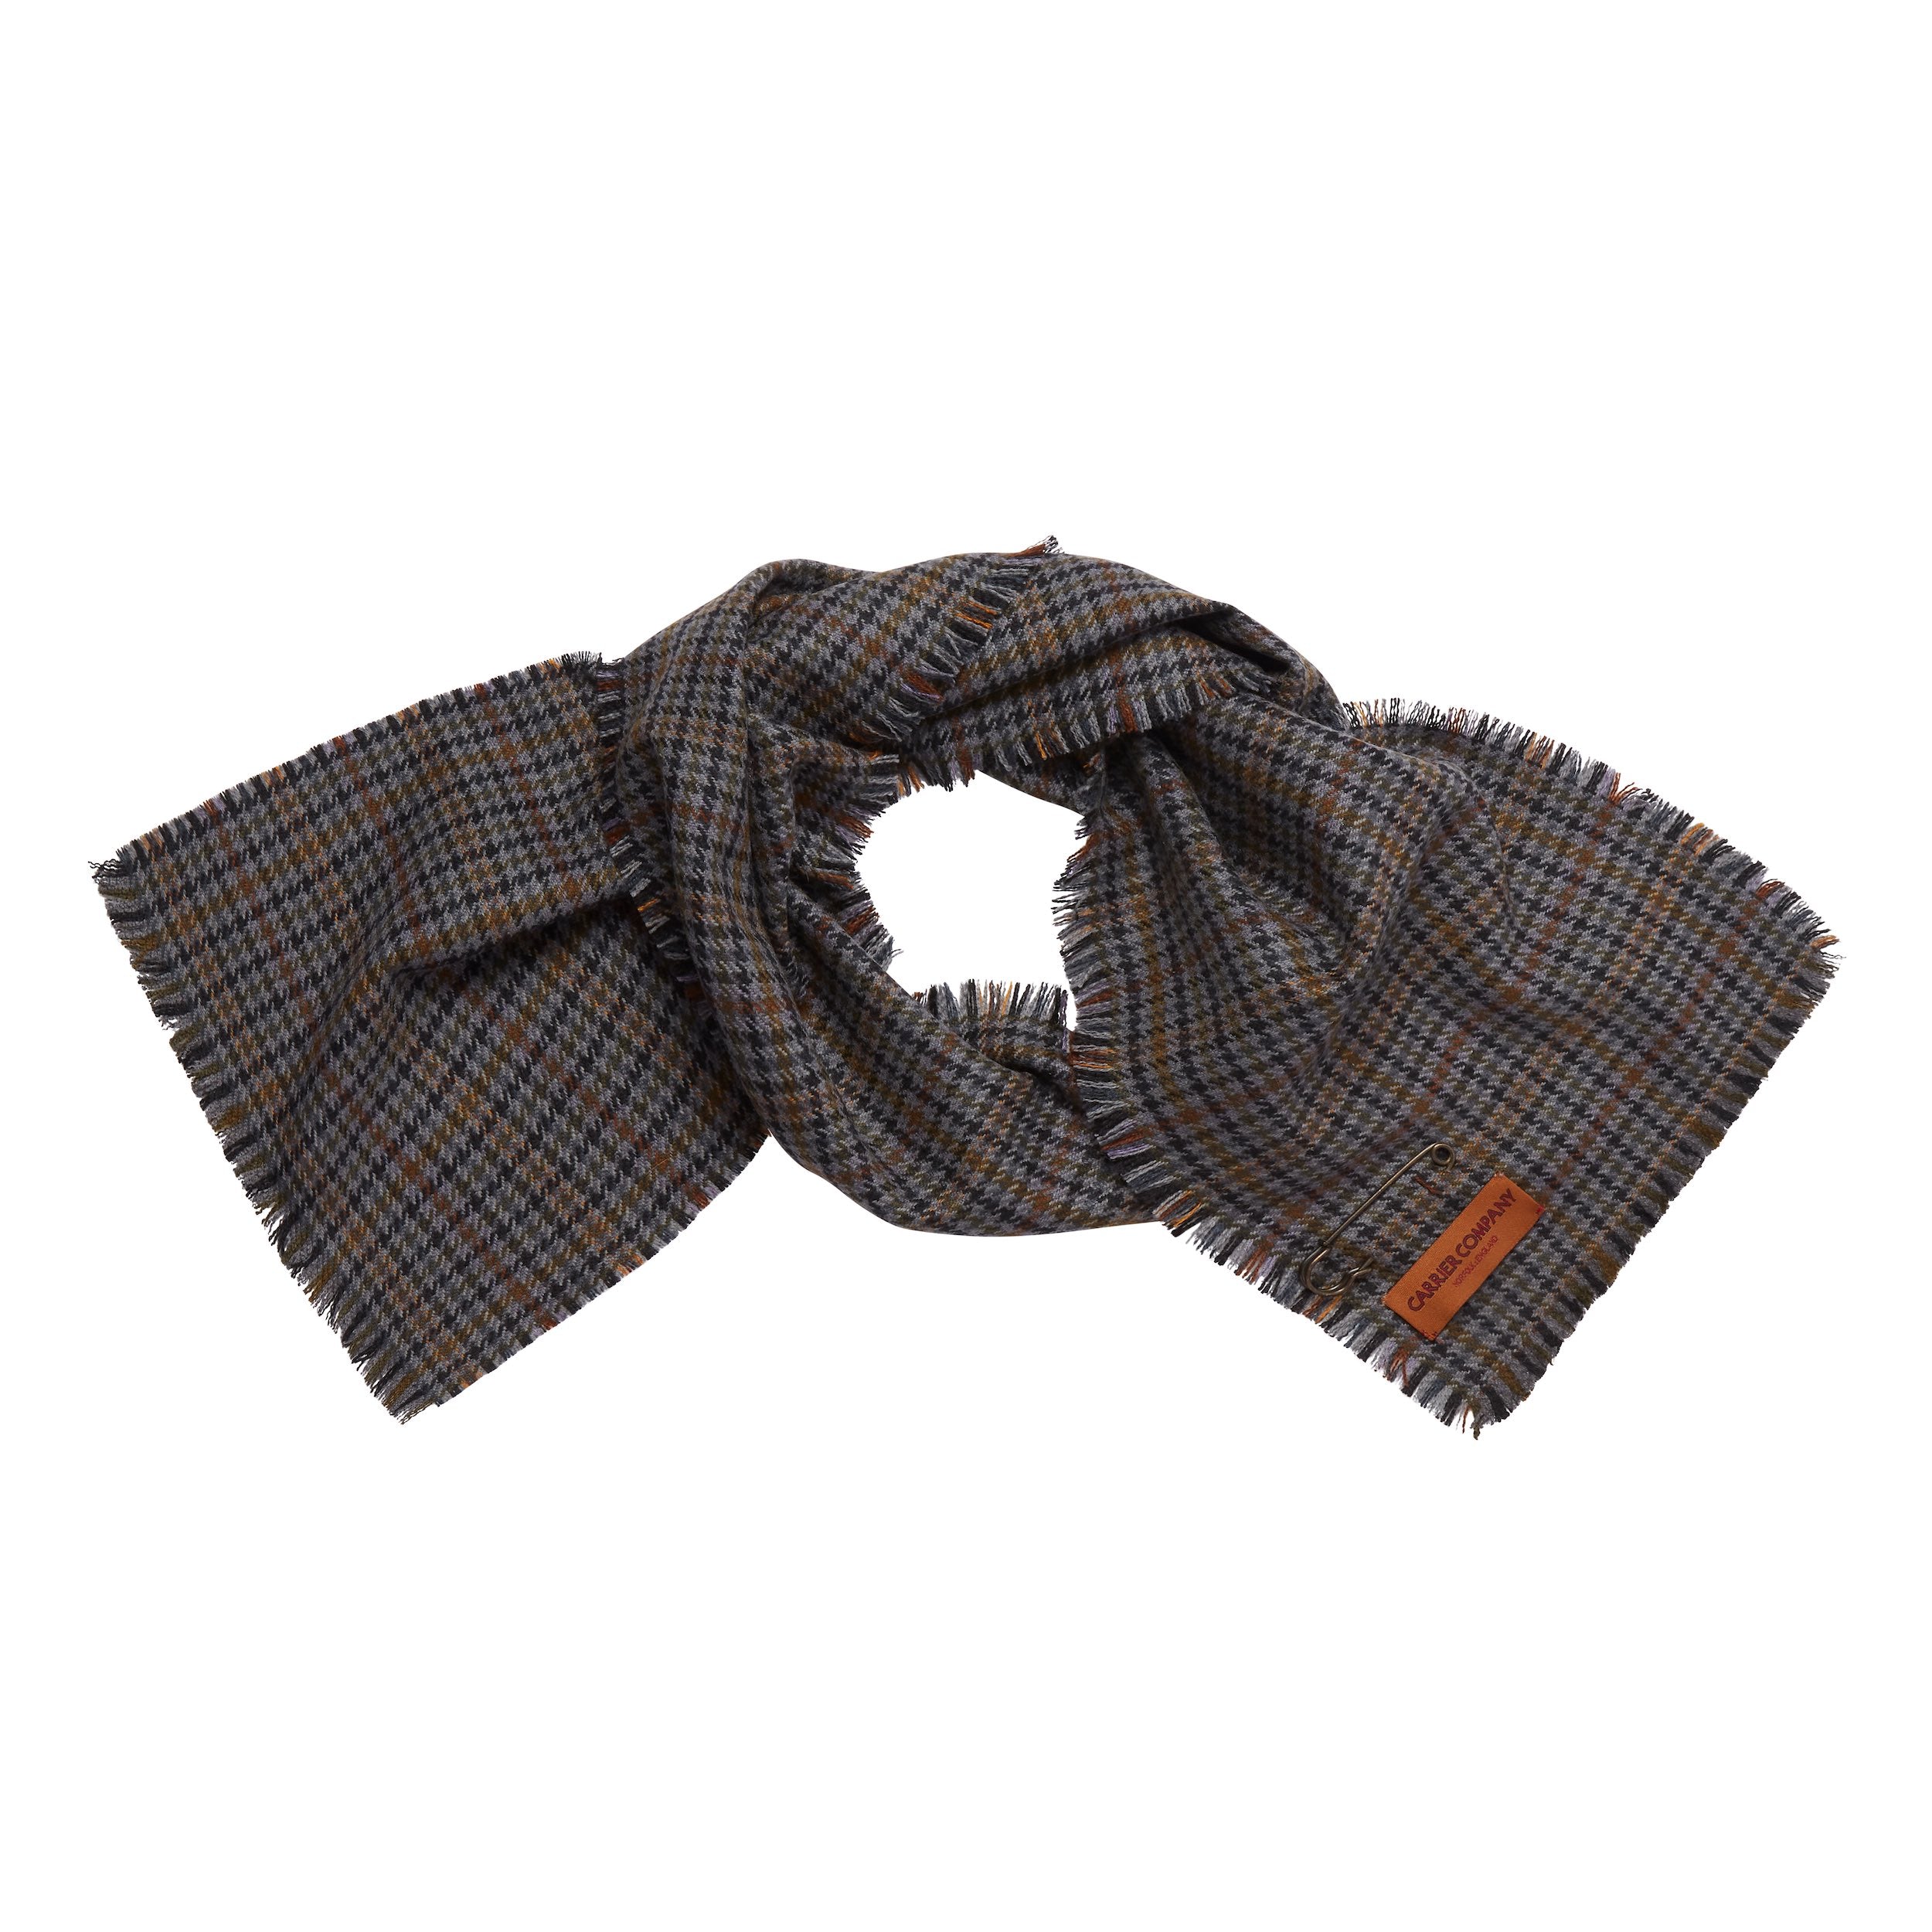 Carrier Company Short Cashmere Scarf in Grey & Orange Houndstooth